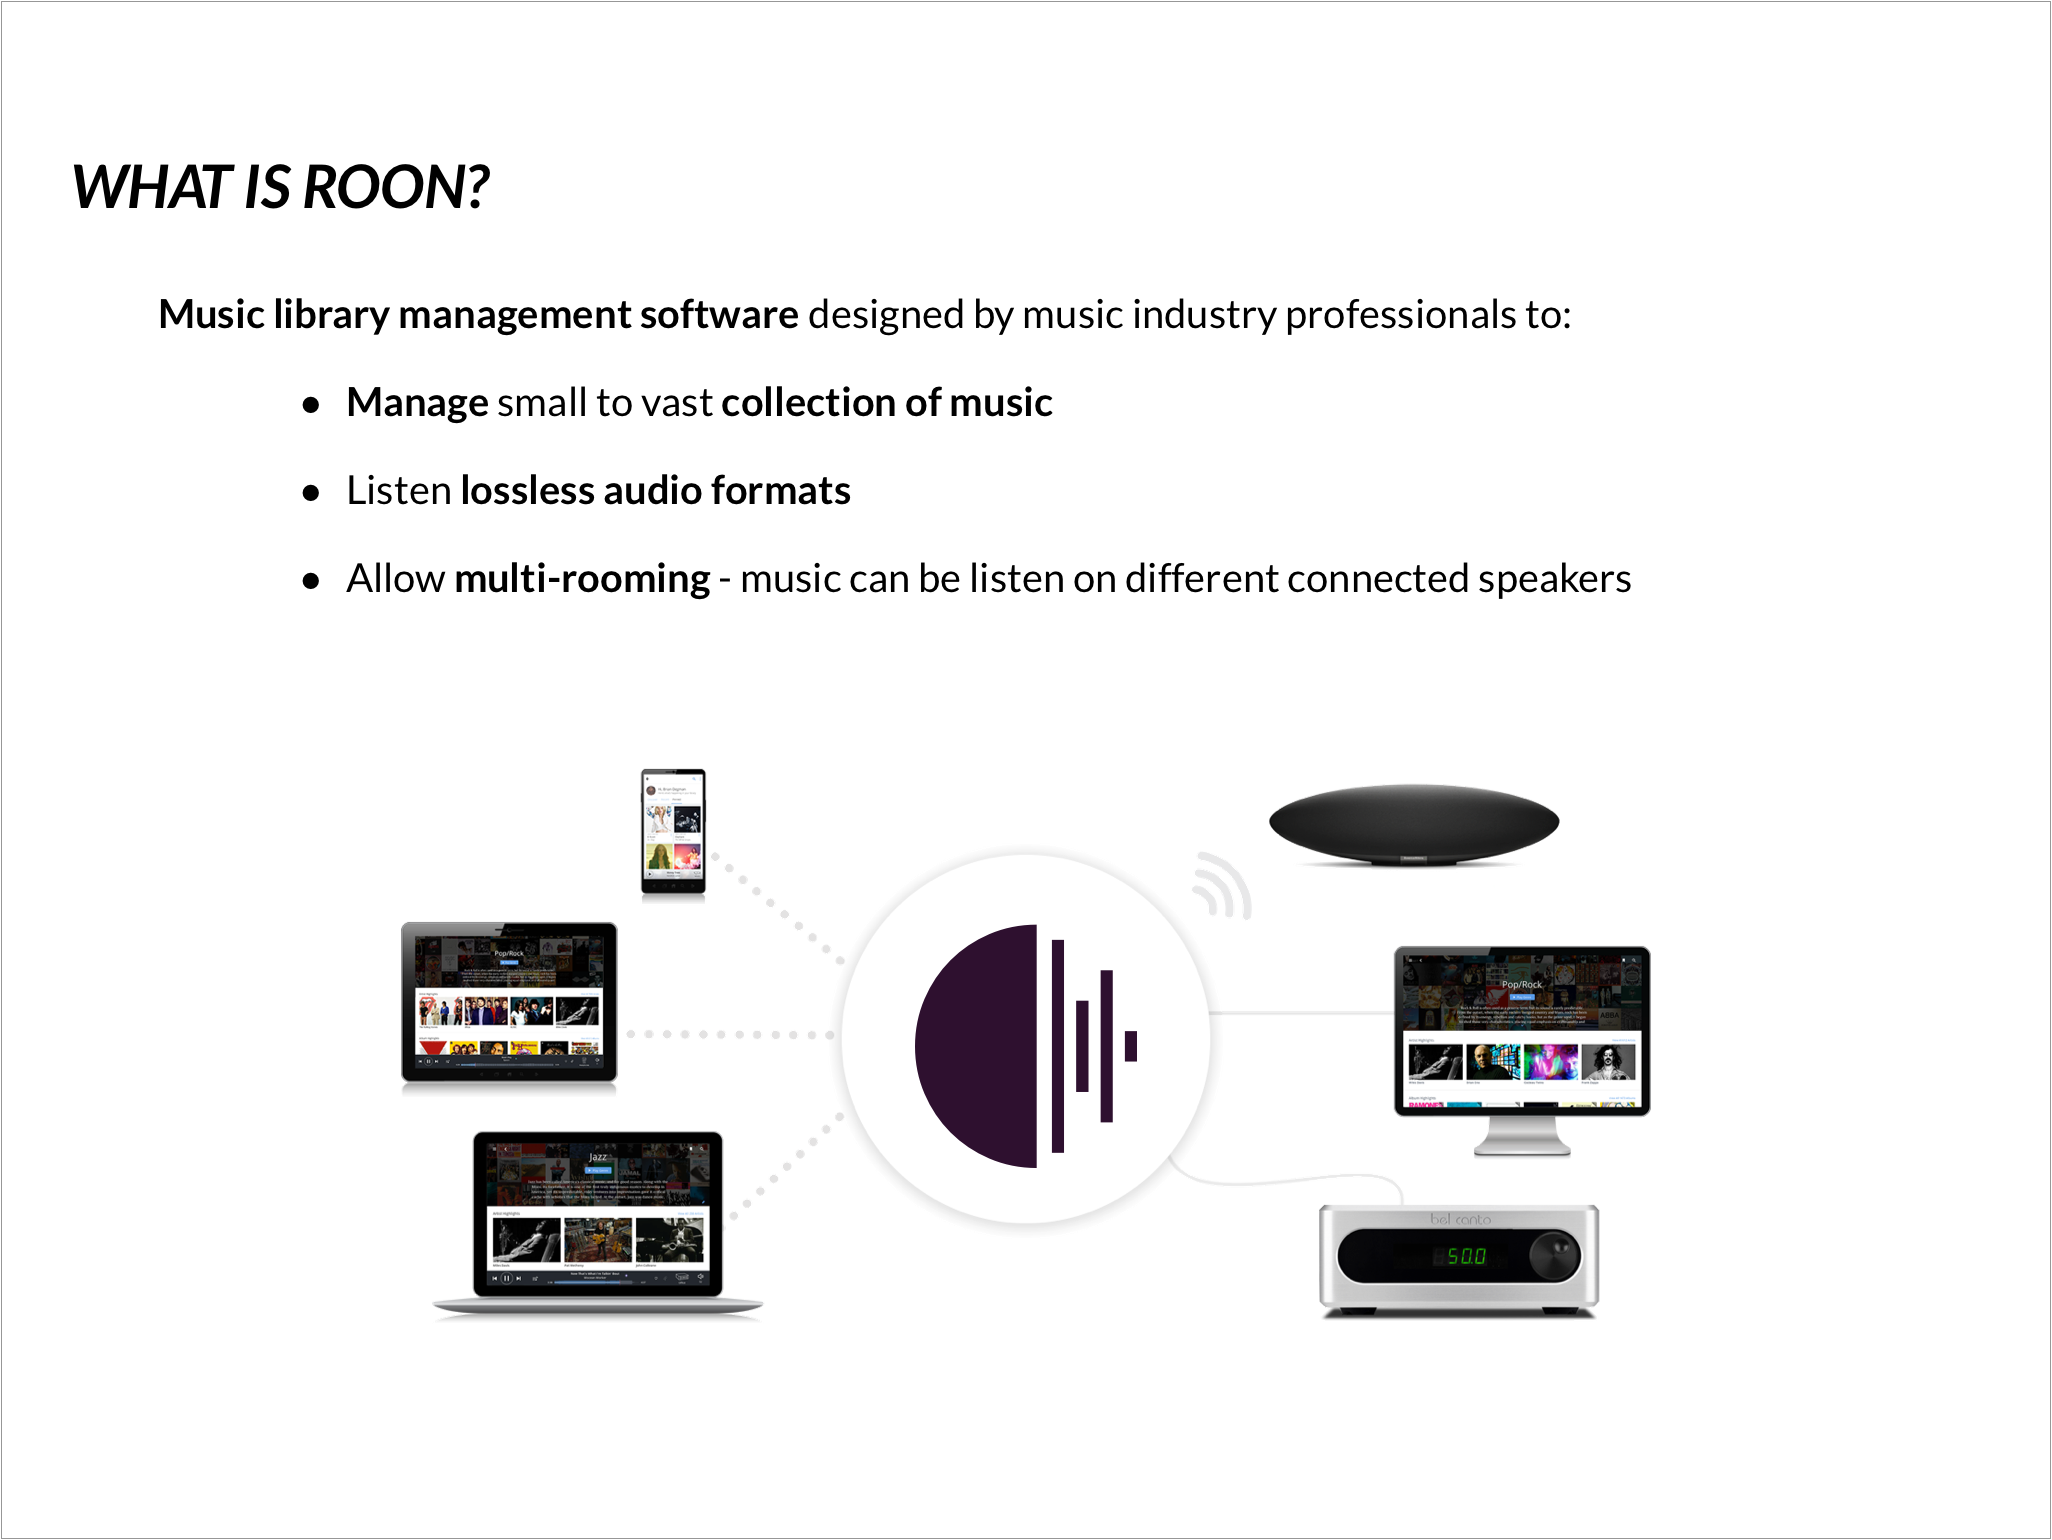 What is Roon? Roon is a music library management software able to manage a vast collection of music